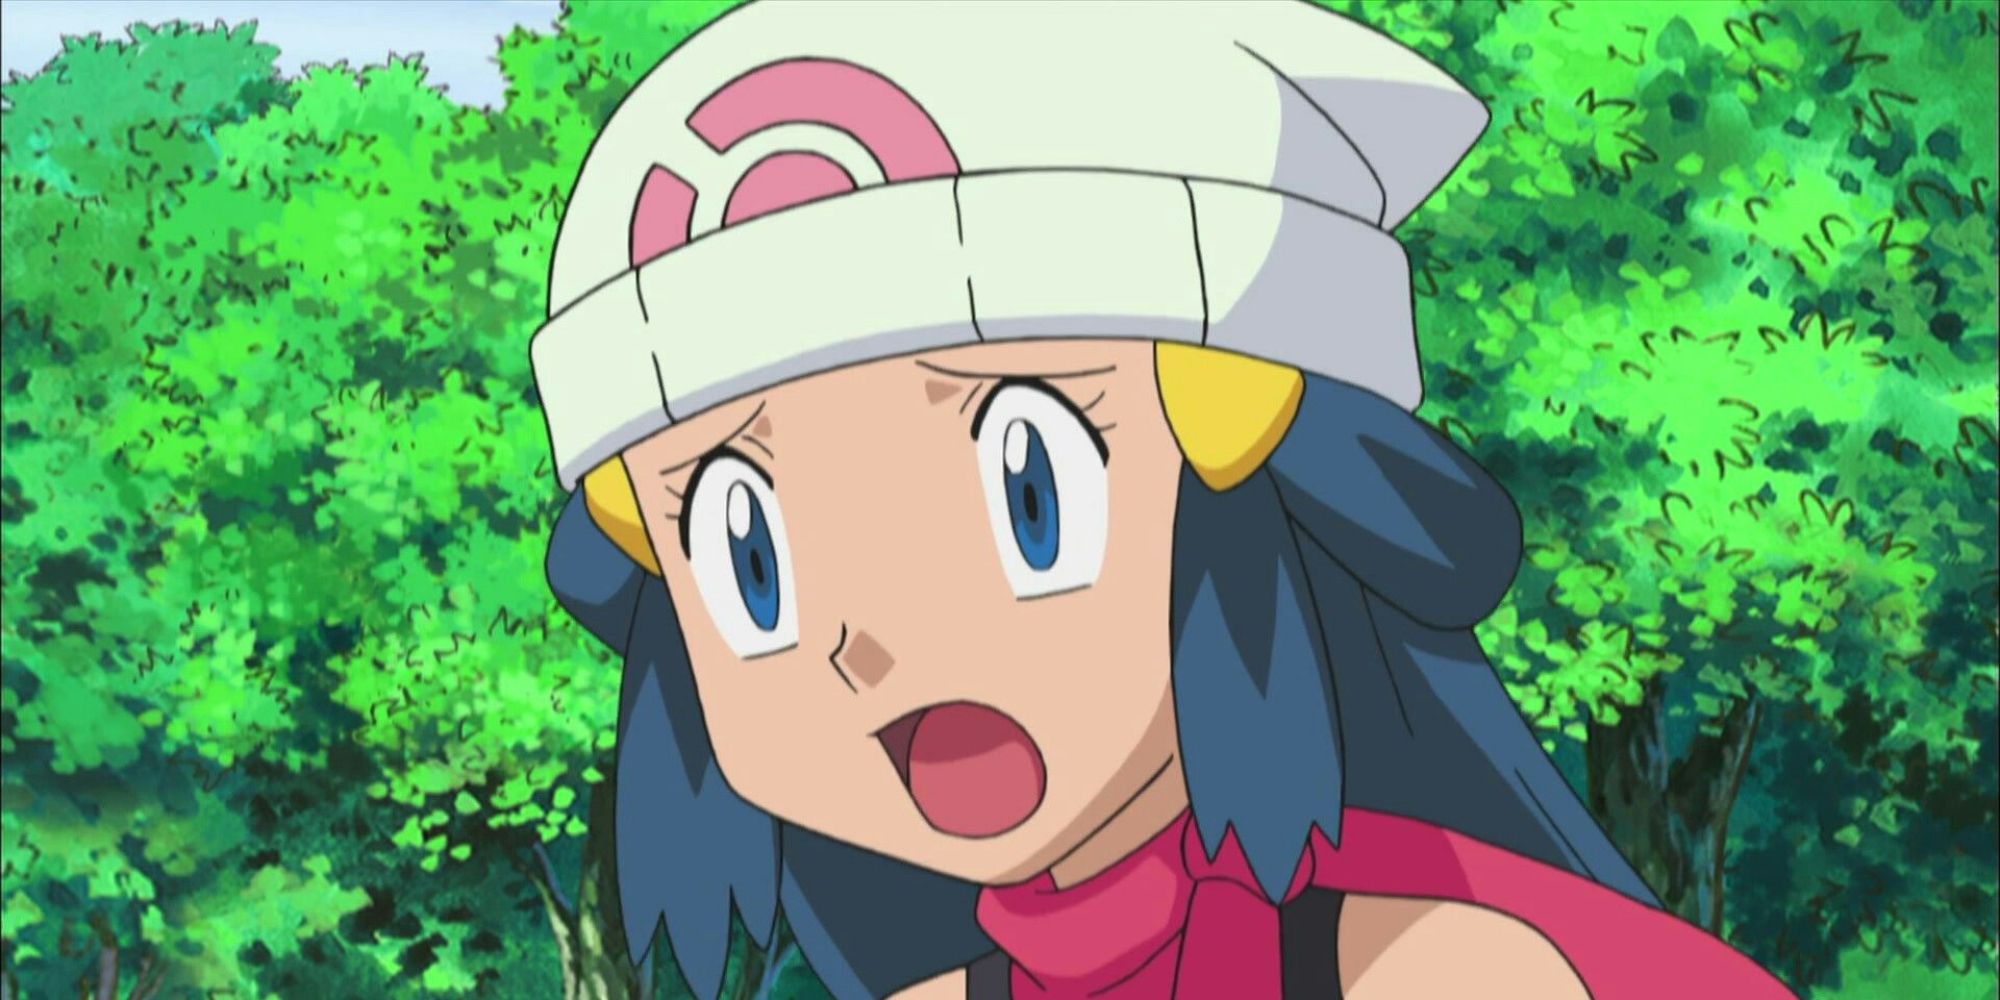 Pokemon anime Dawn looking fearfully at something off-screen